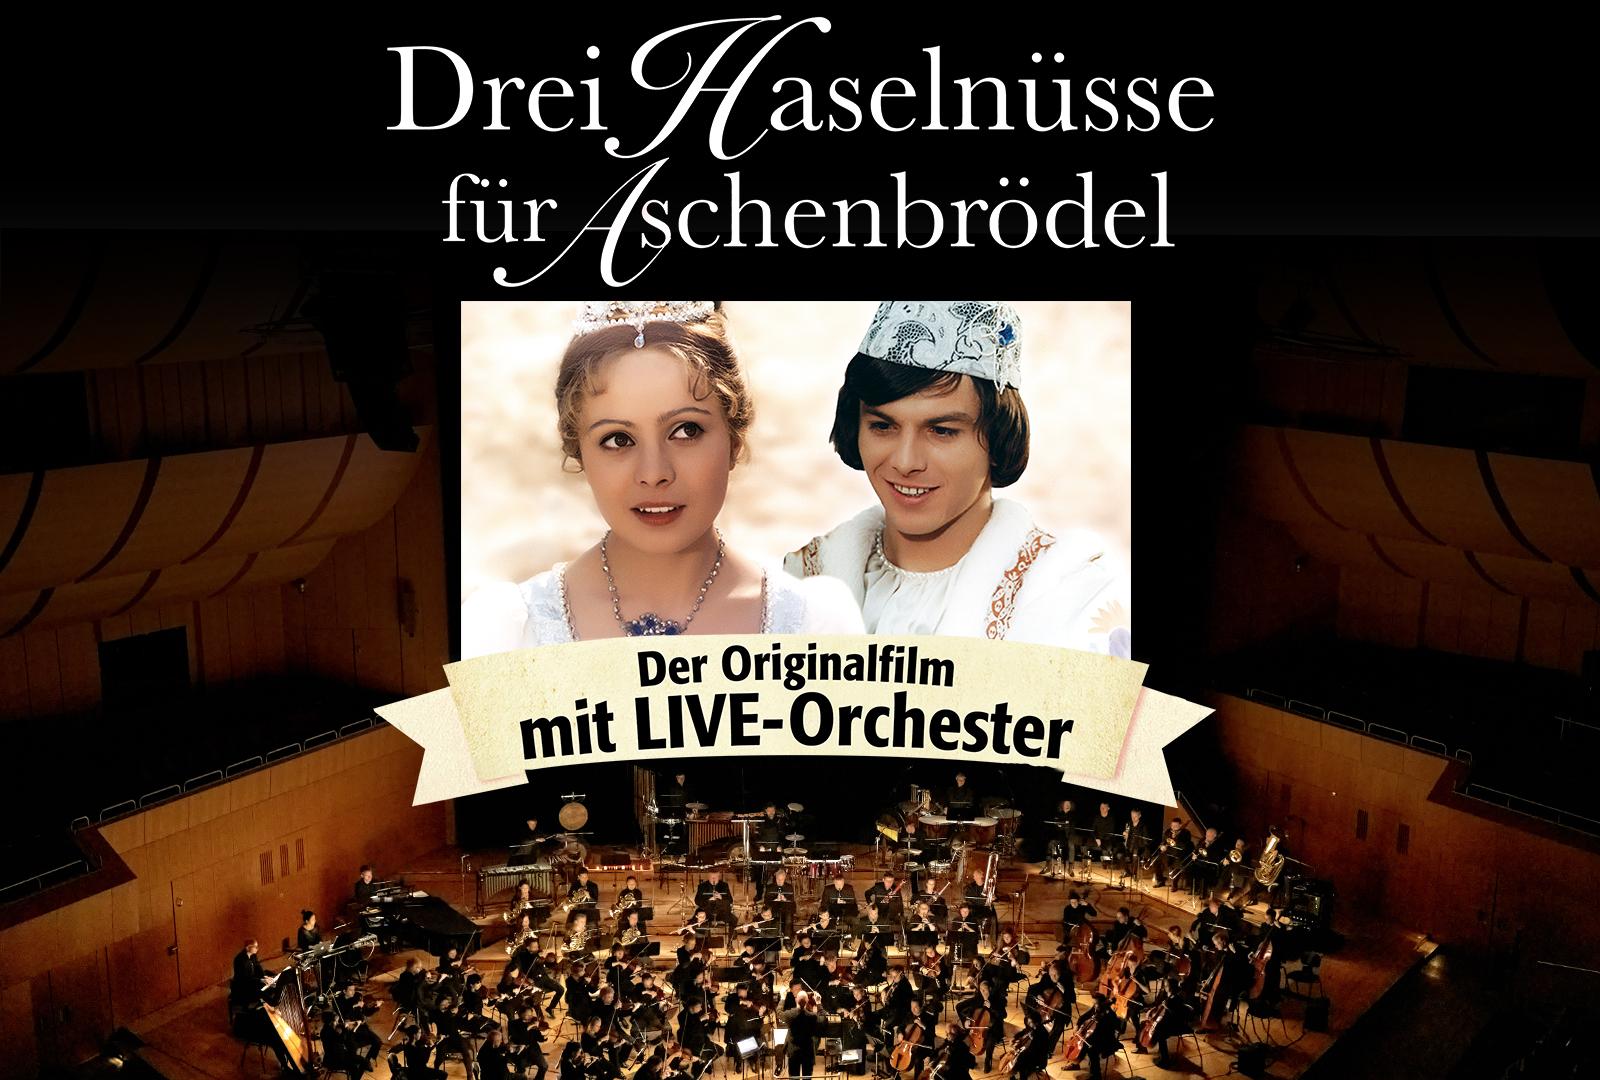 The film's cover and title are emblazoned on a photograph showing a symphony orchestra in a concert hall.